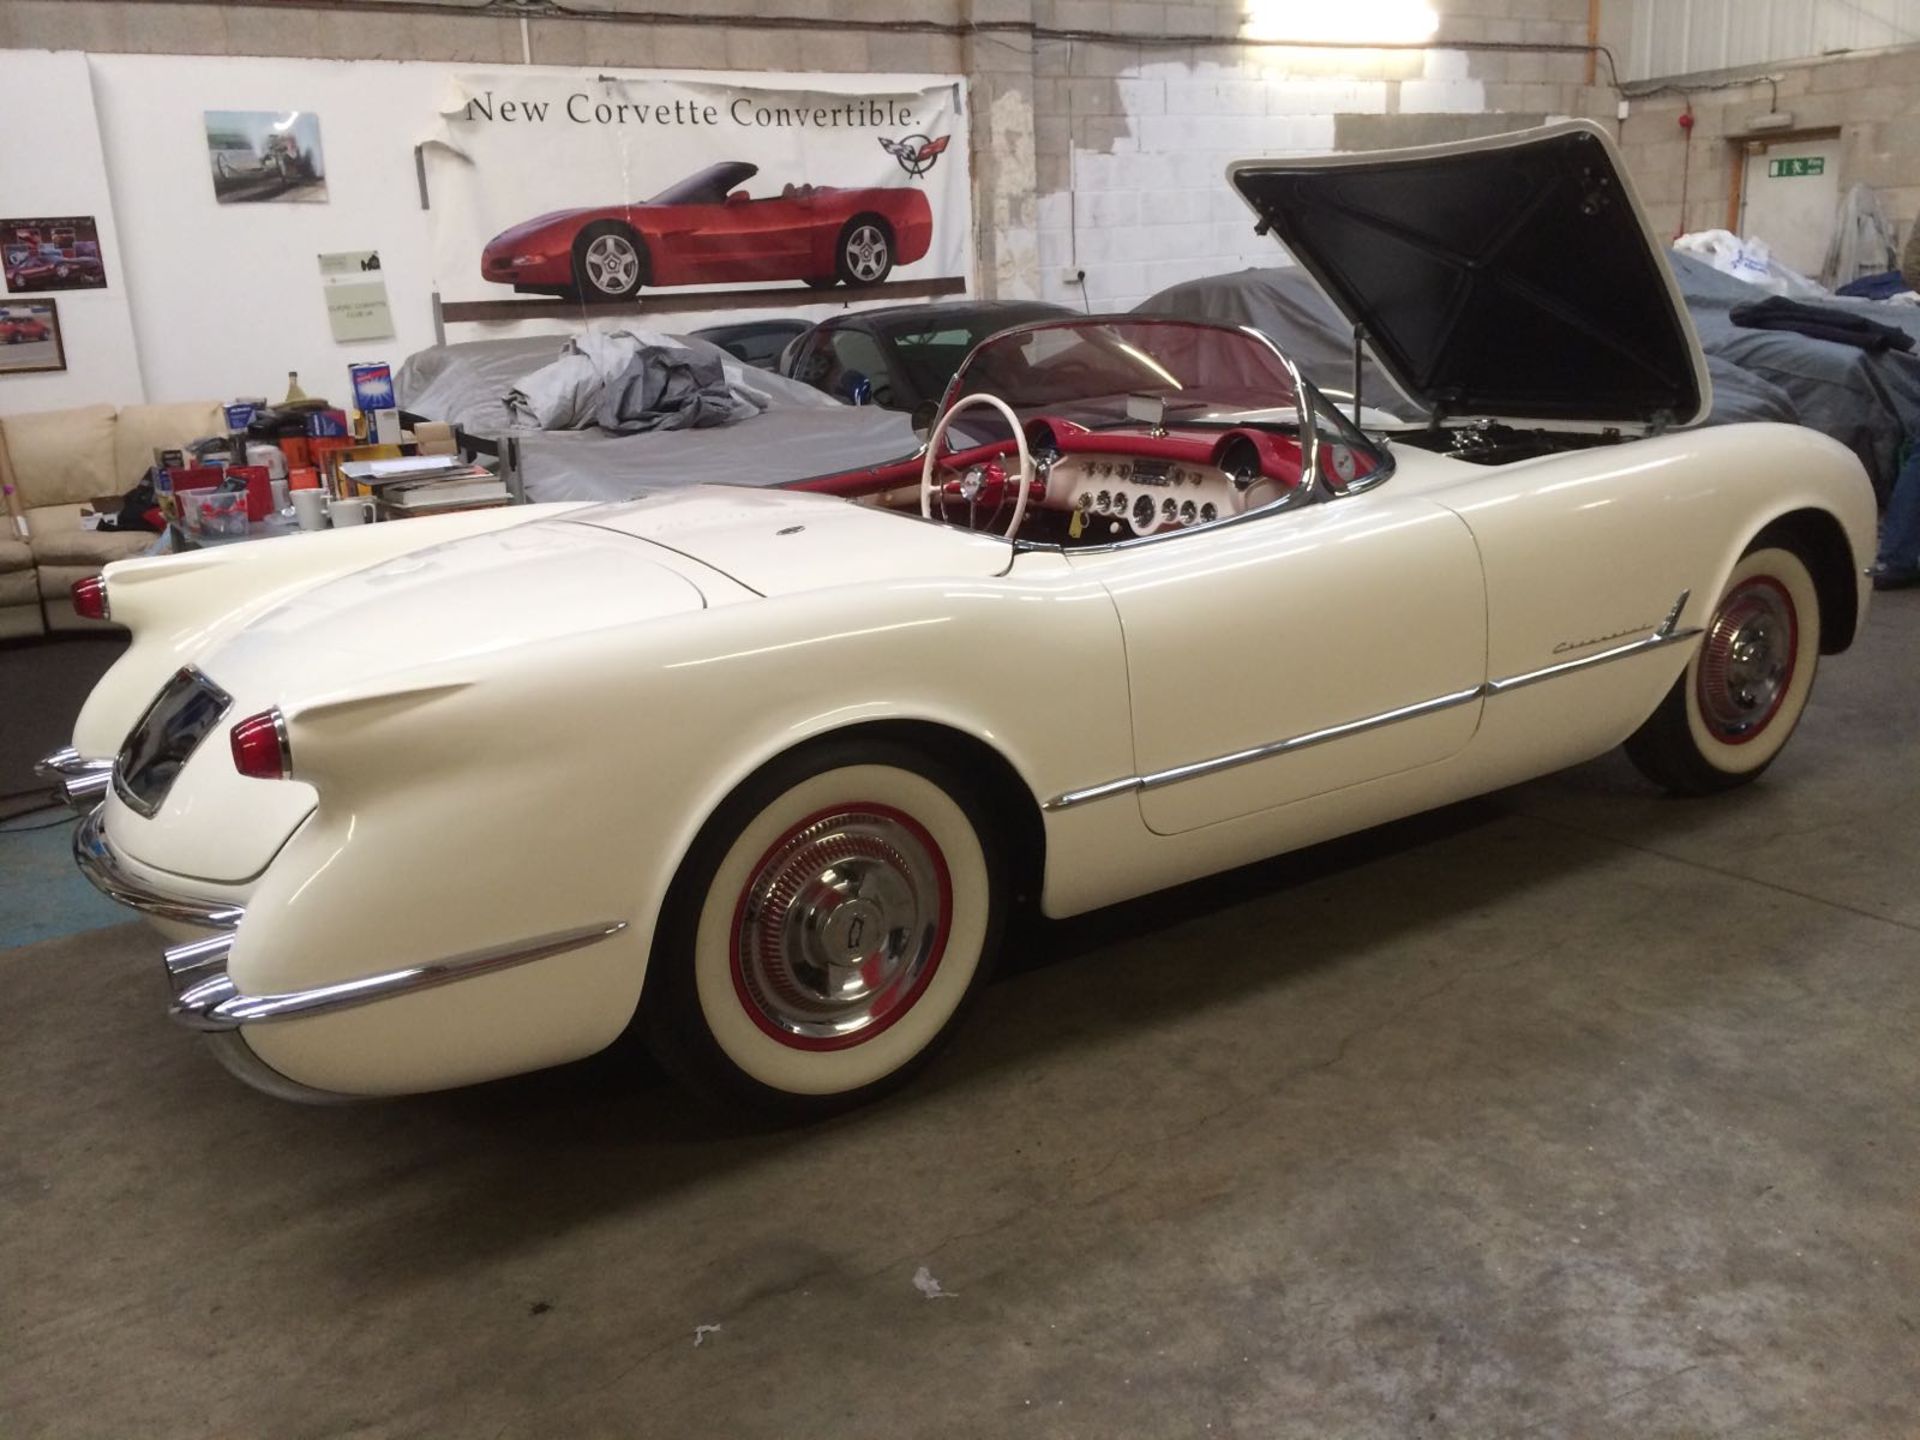 Believed To Be The Only Road Legal, 1954 Corvette In The UK ***NO RESERVE*** - Featured at the LCCS - Image 9 of 22